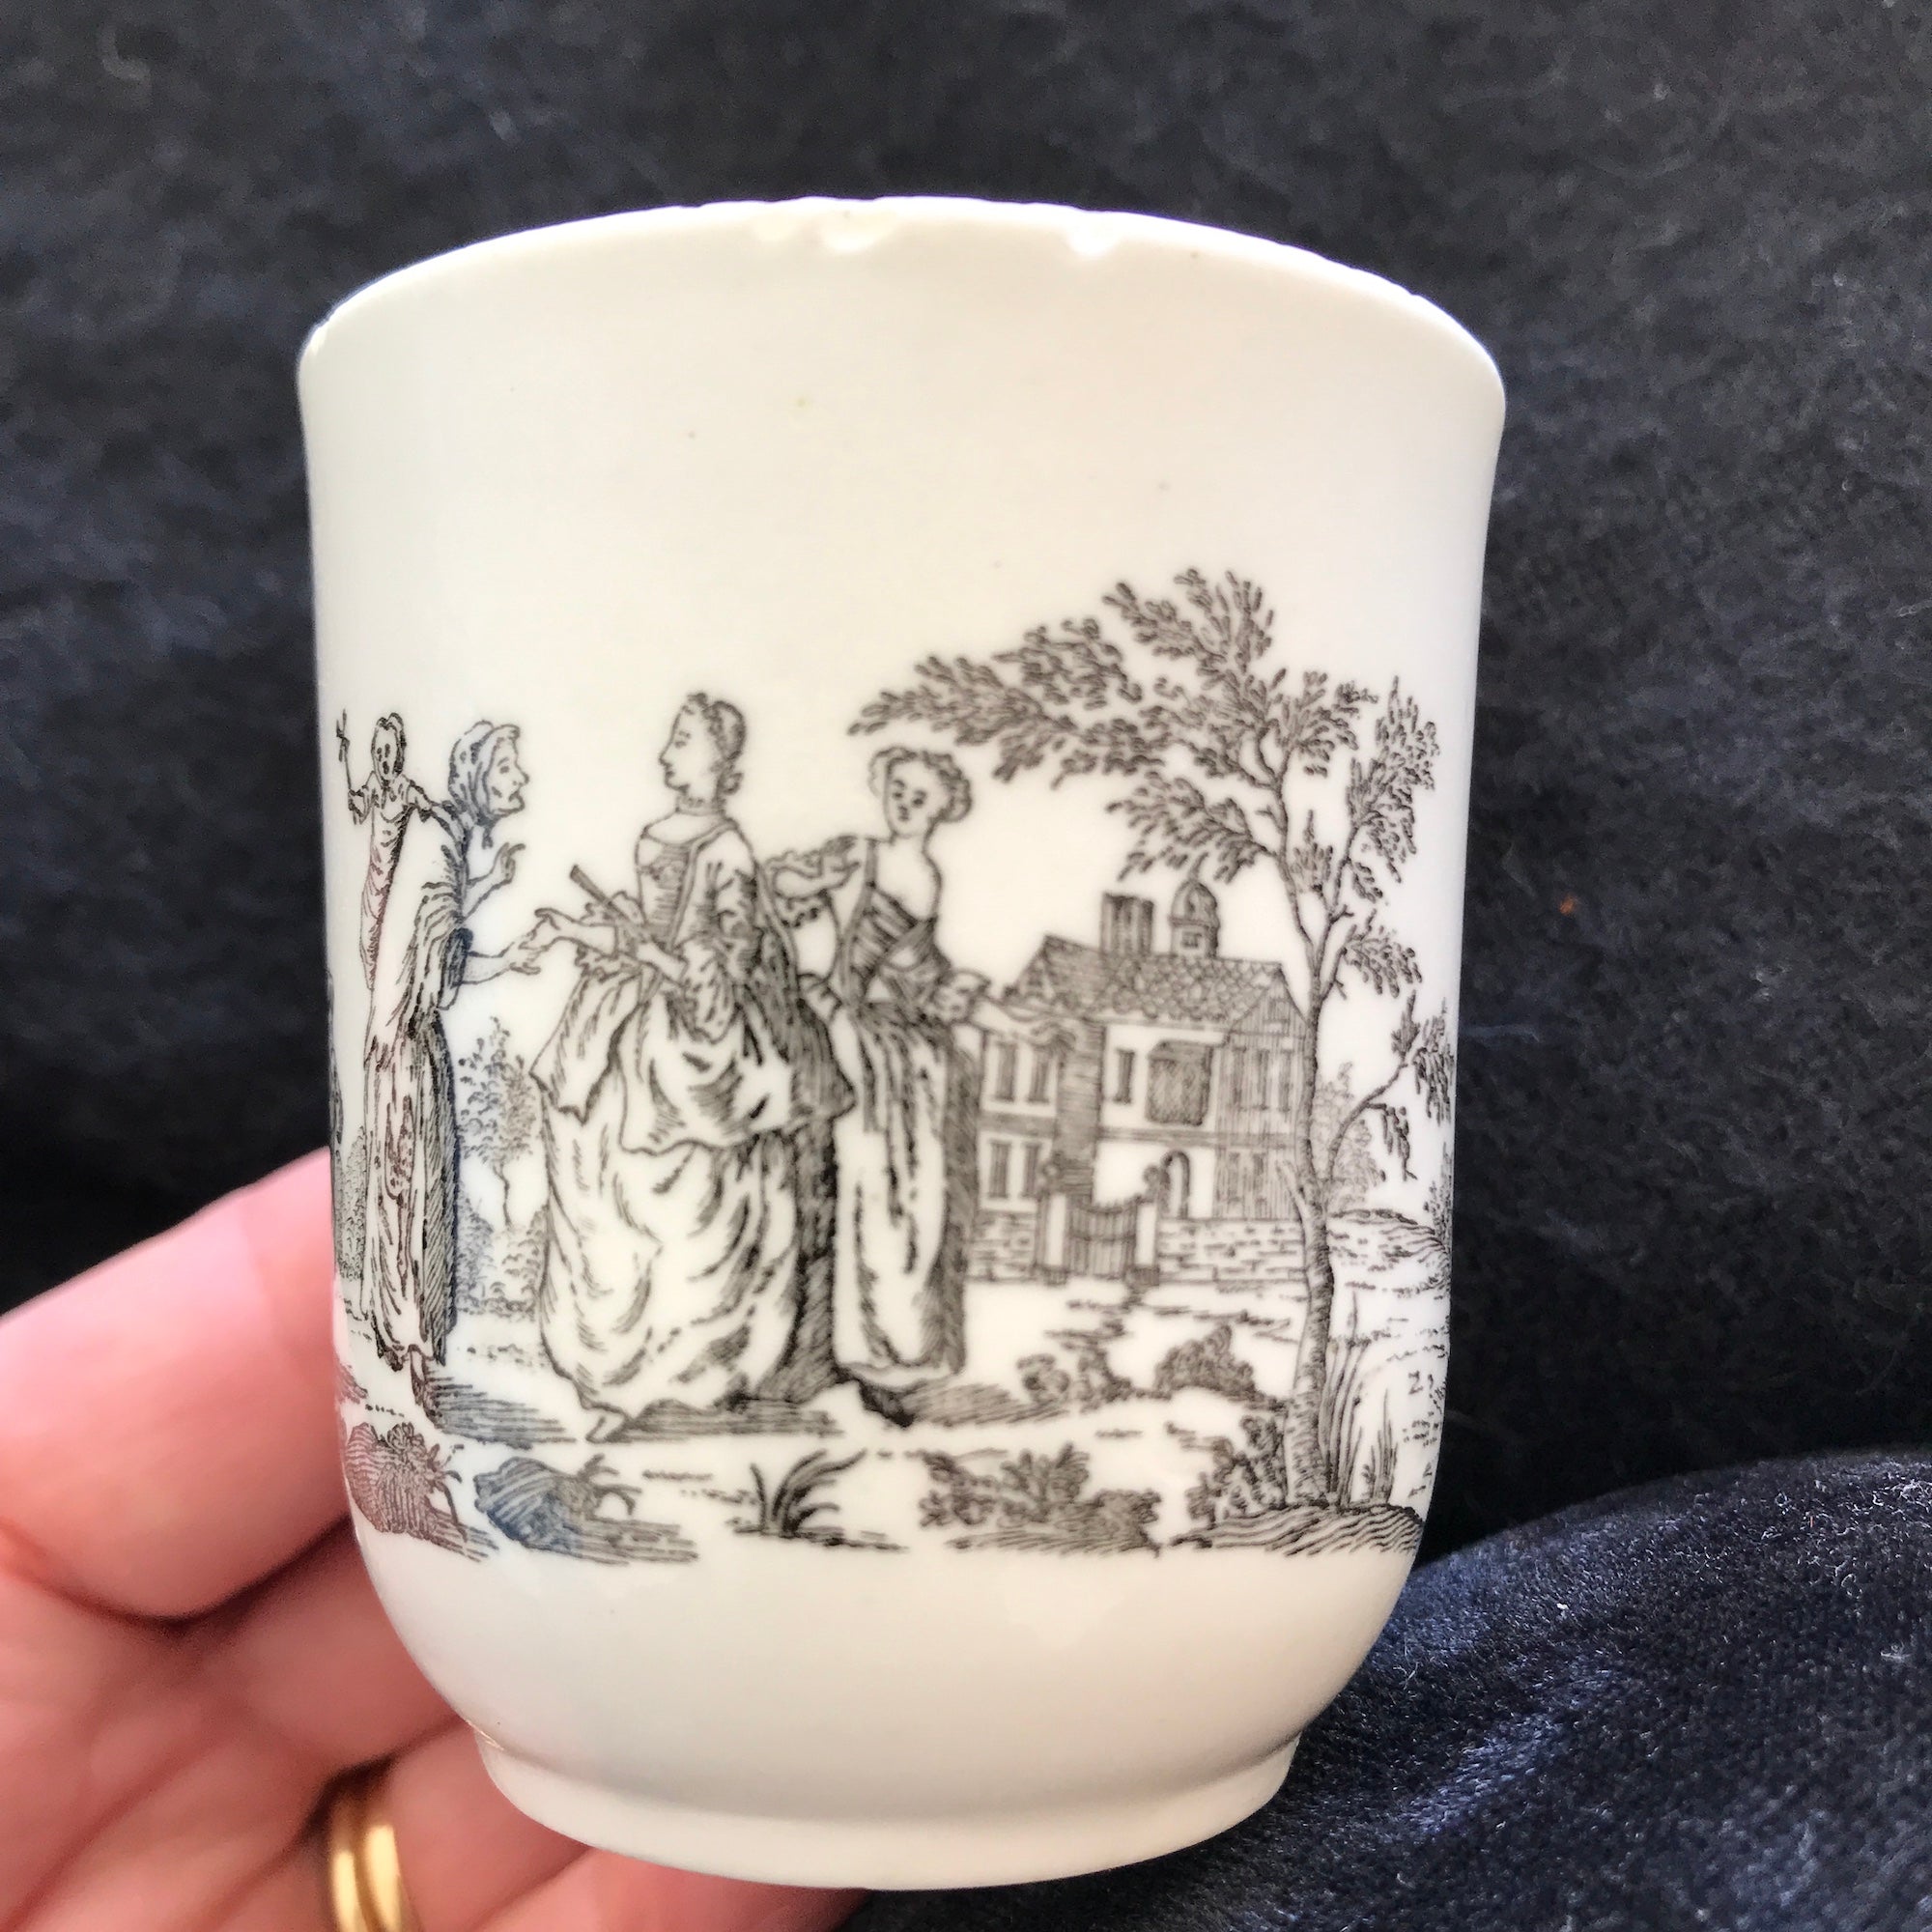 18th Century Worcester Porcelain Coffee Cup with Smokey Primitive Print.